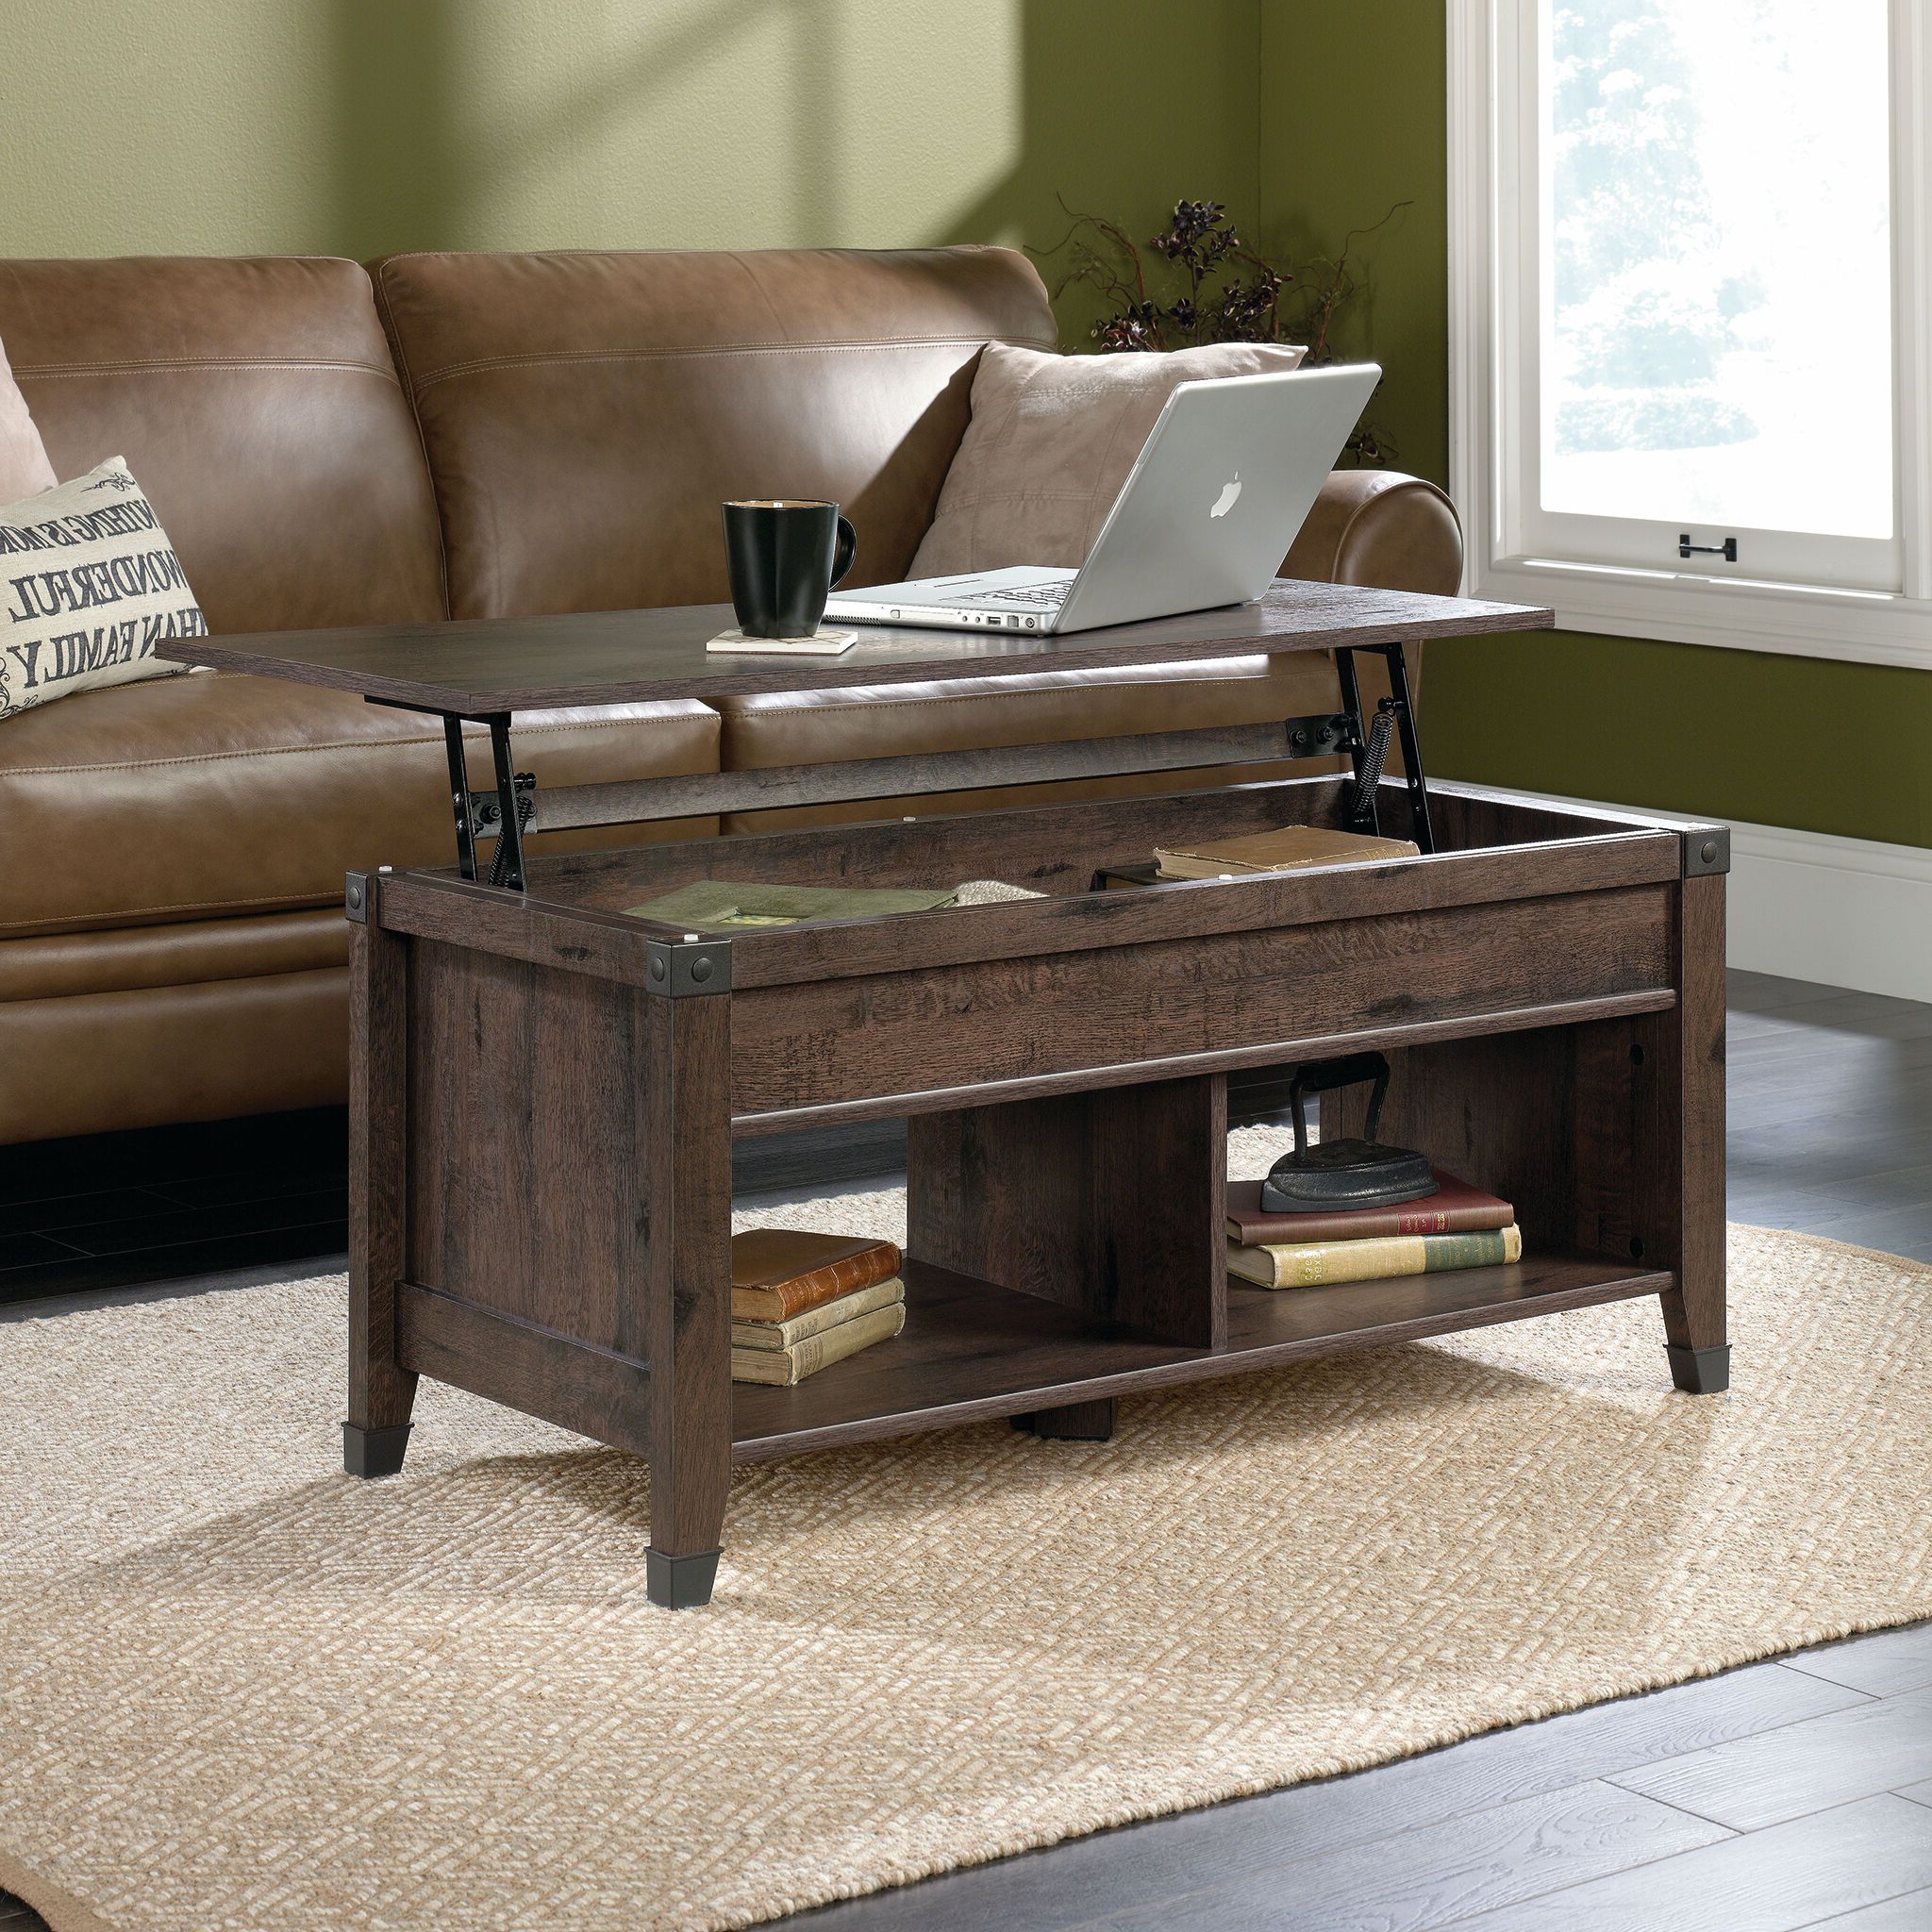 Rectangular Lift Top Contemporary Coffee Table In Coffee Oak (View 4 of 15)